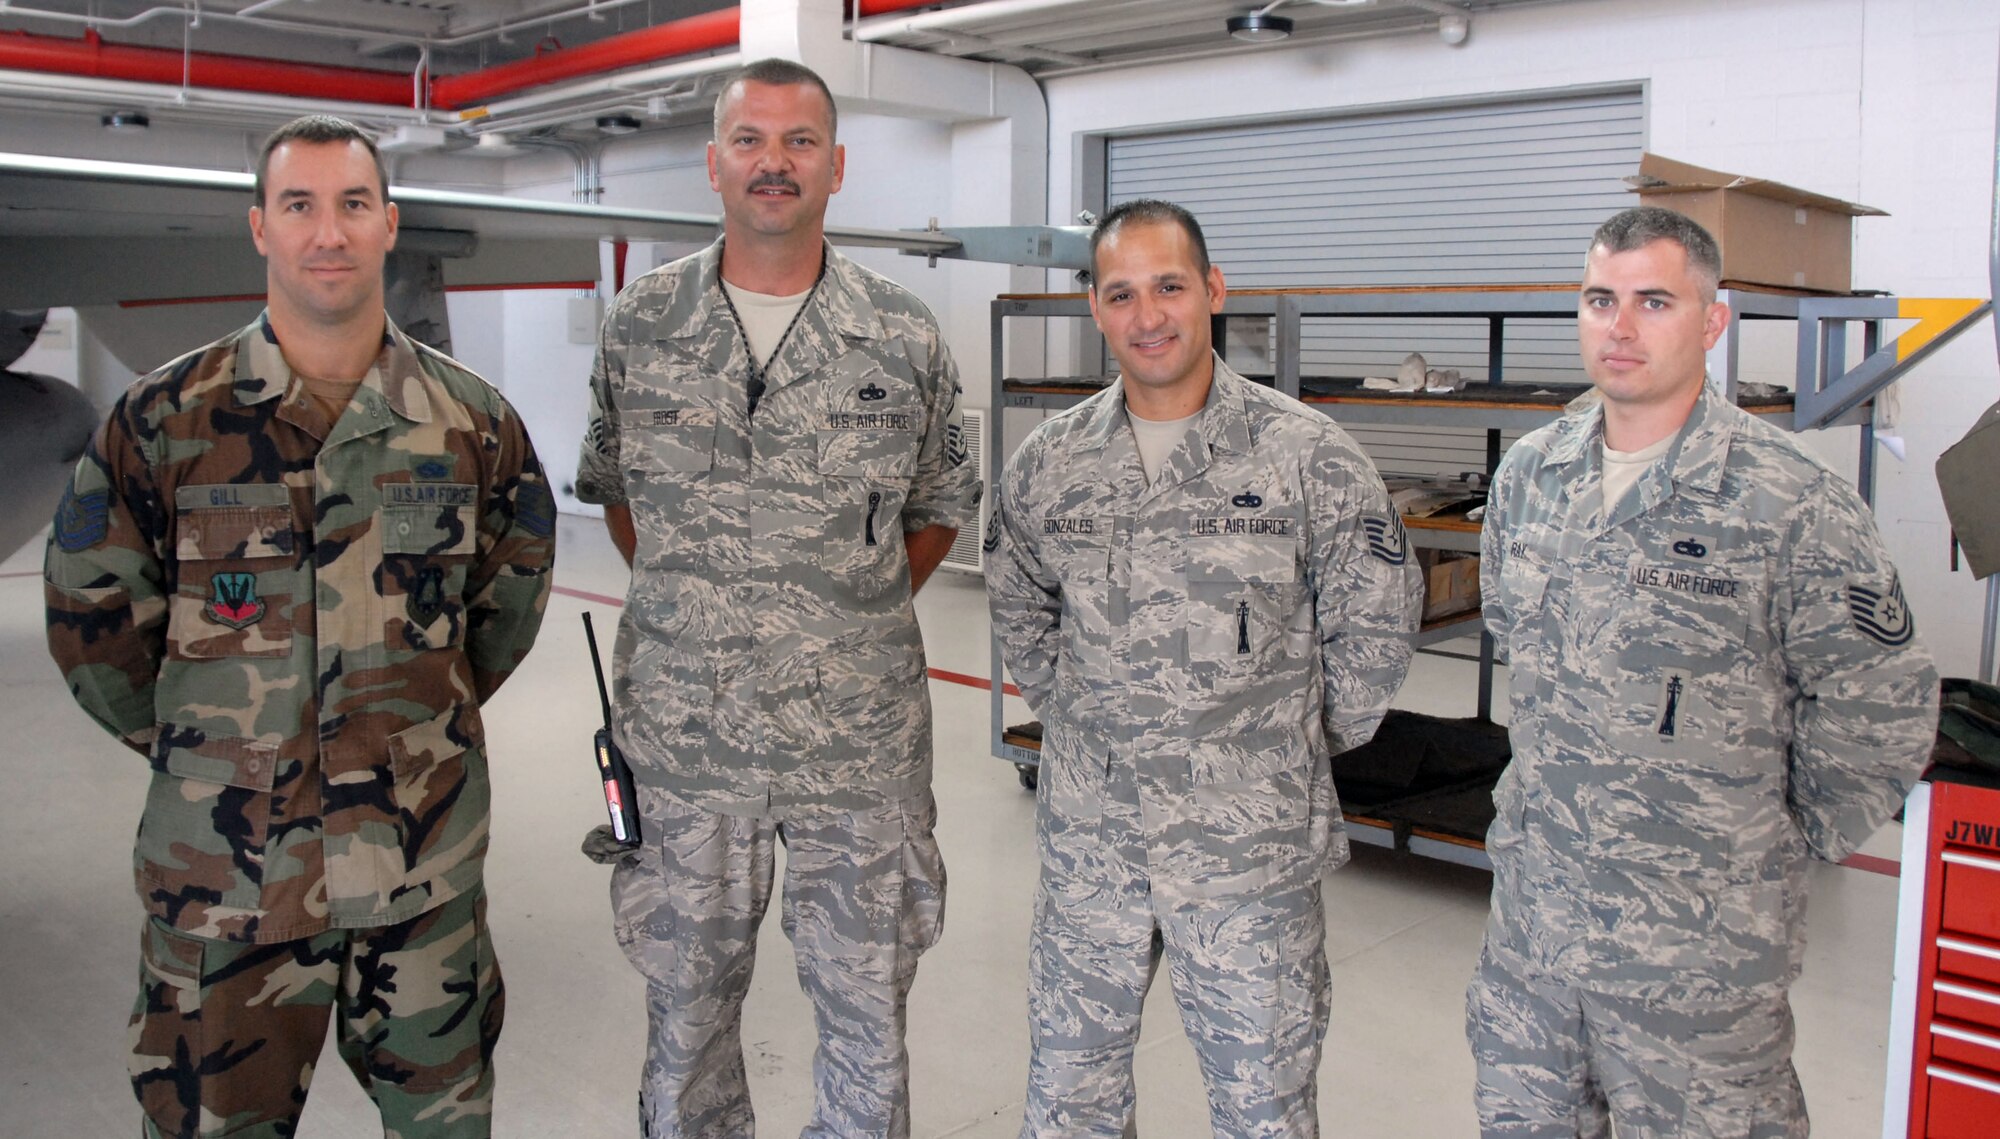 Members of the 180th who have volunteered at Balad Theater Hospital, Iraq, are from left to right, Tech. Sgt. Jeffrey Gill, Weapons Journeyman, Master Sgt. David Frost, Weapons Expediter, Tech. Sgt. Tom Gonzales, Weapons Journeyman, and Tech. Sgt. Joe Ray, Weapons Journeyman.